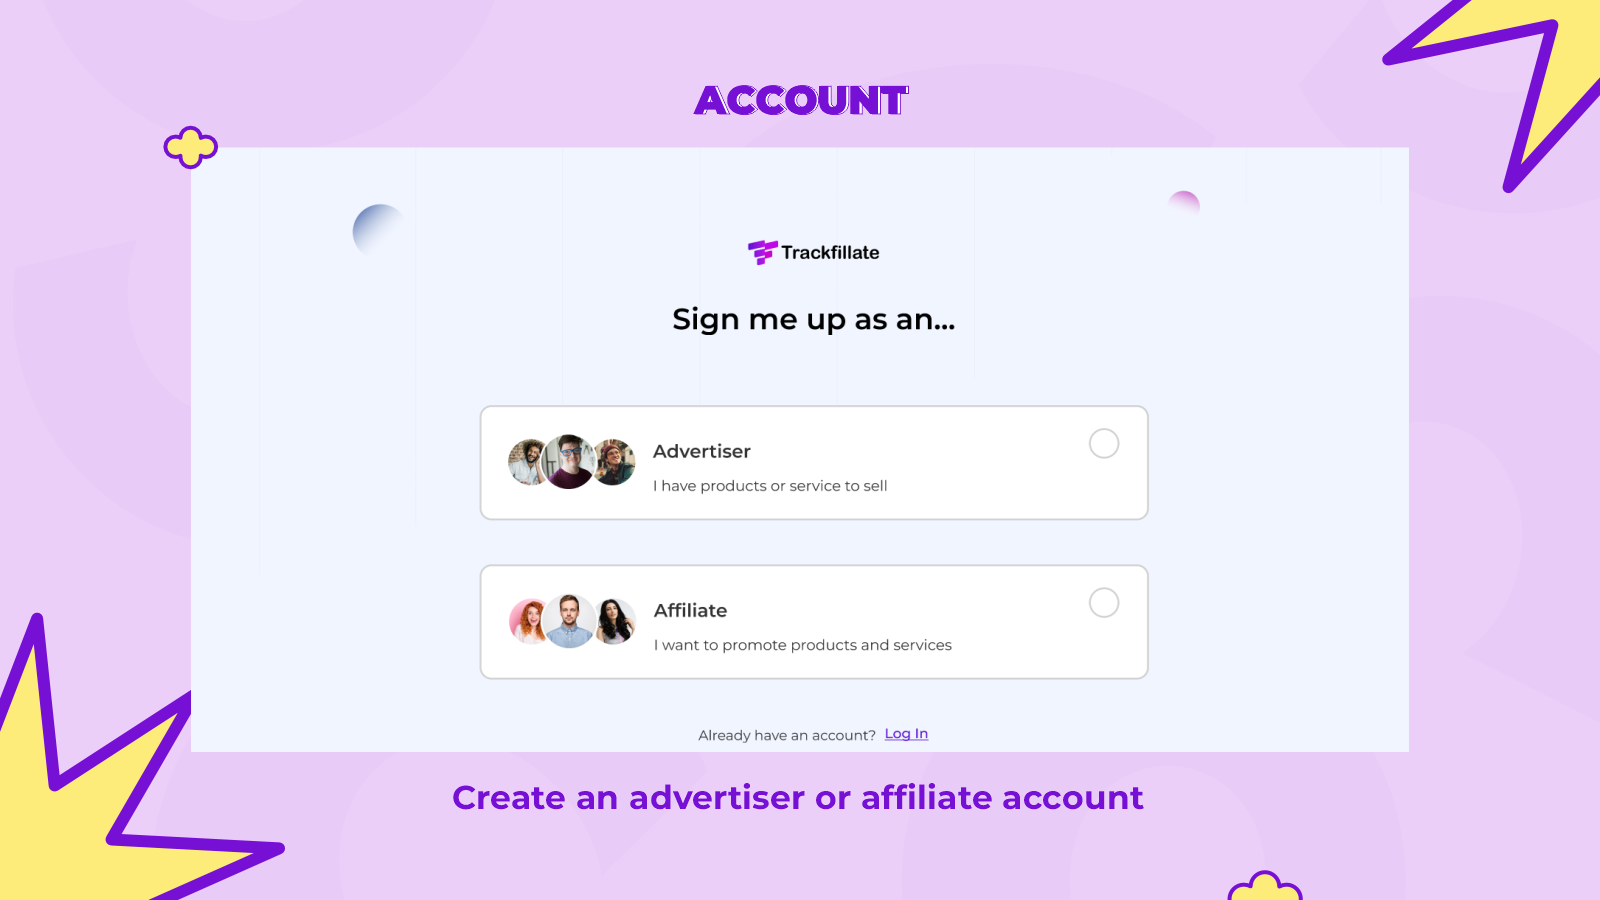 Create an affiliate or advertiser account in easy steps